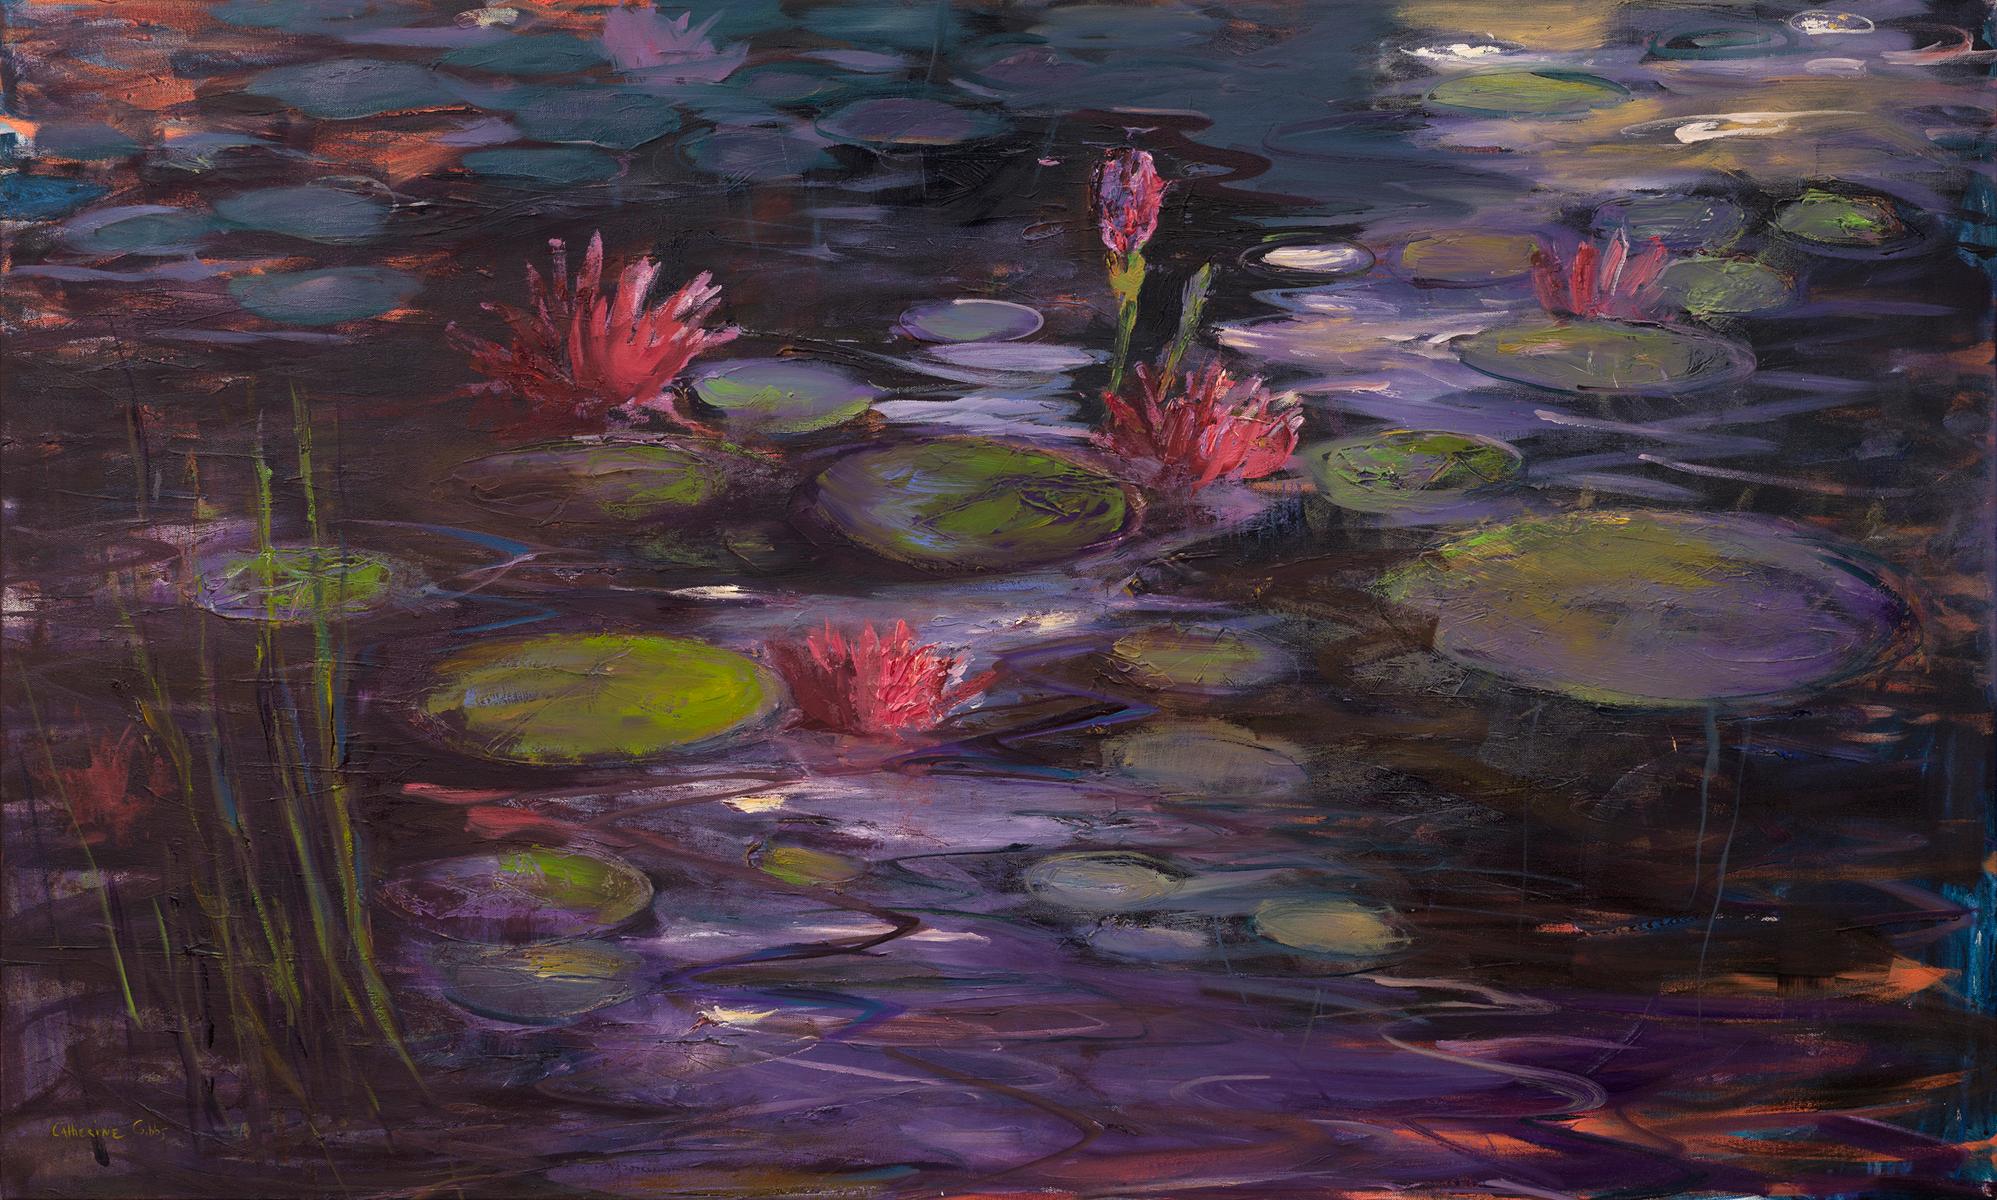 Catherine Picard-Gibbs Landscape Painting - "Moonlit Water Lilies", landscape, textural, purples, pink, green, oil painting